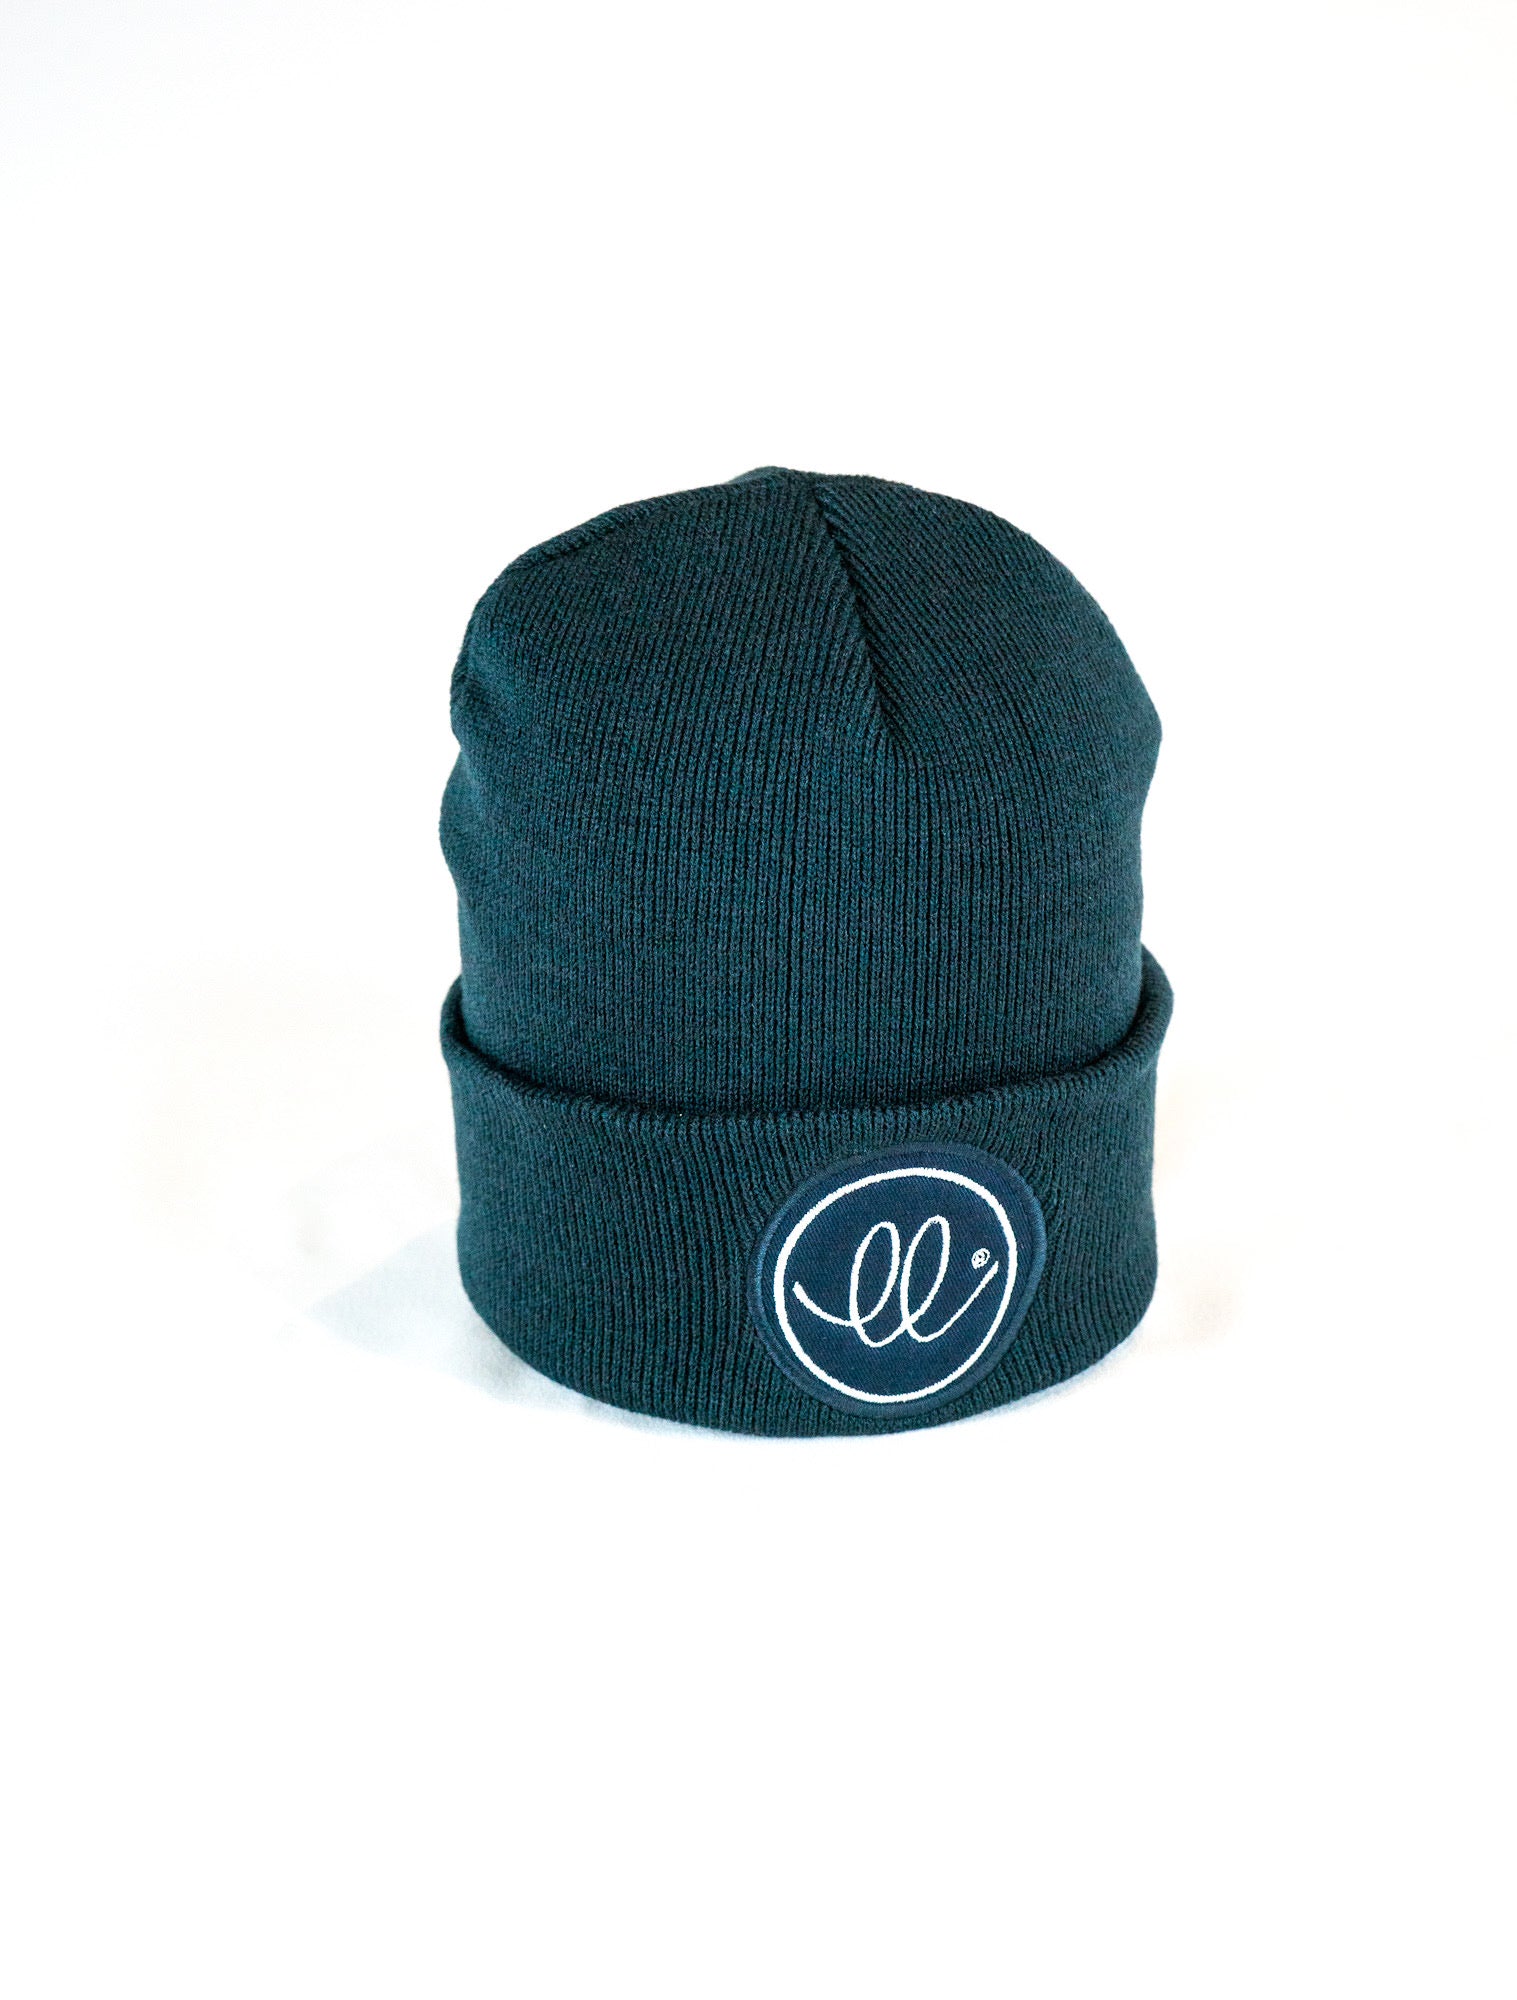 navy blue and unisex beanie hat. sustainably made.